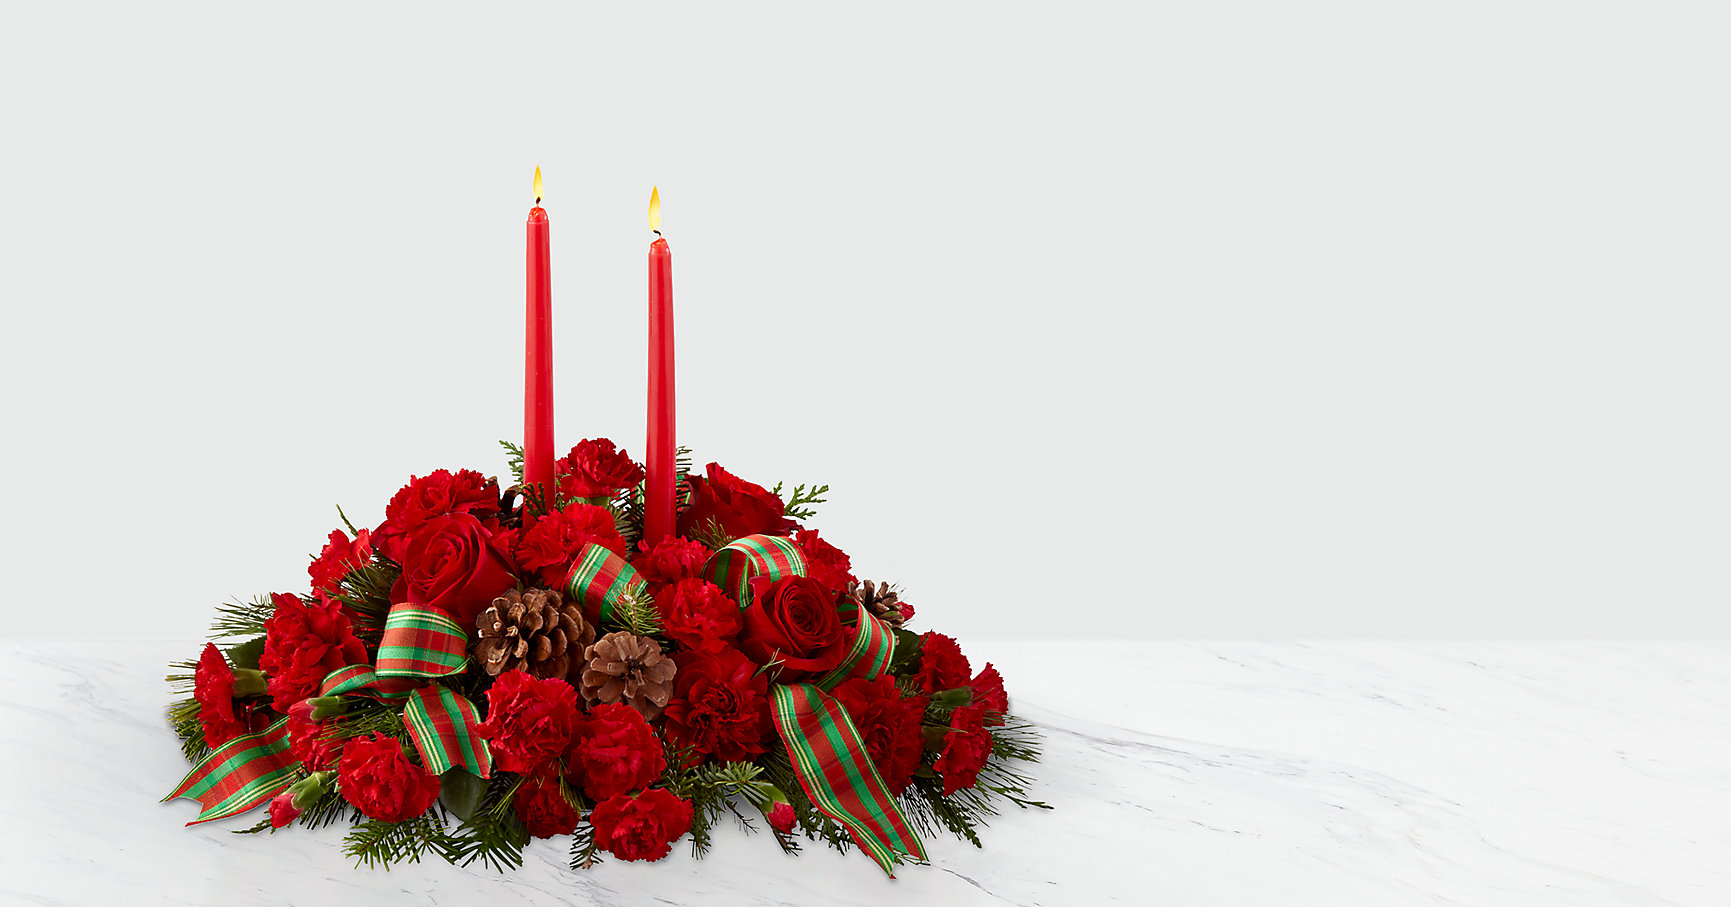 The FTD® Holiday Classics™ Centerpiece